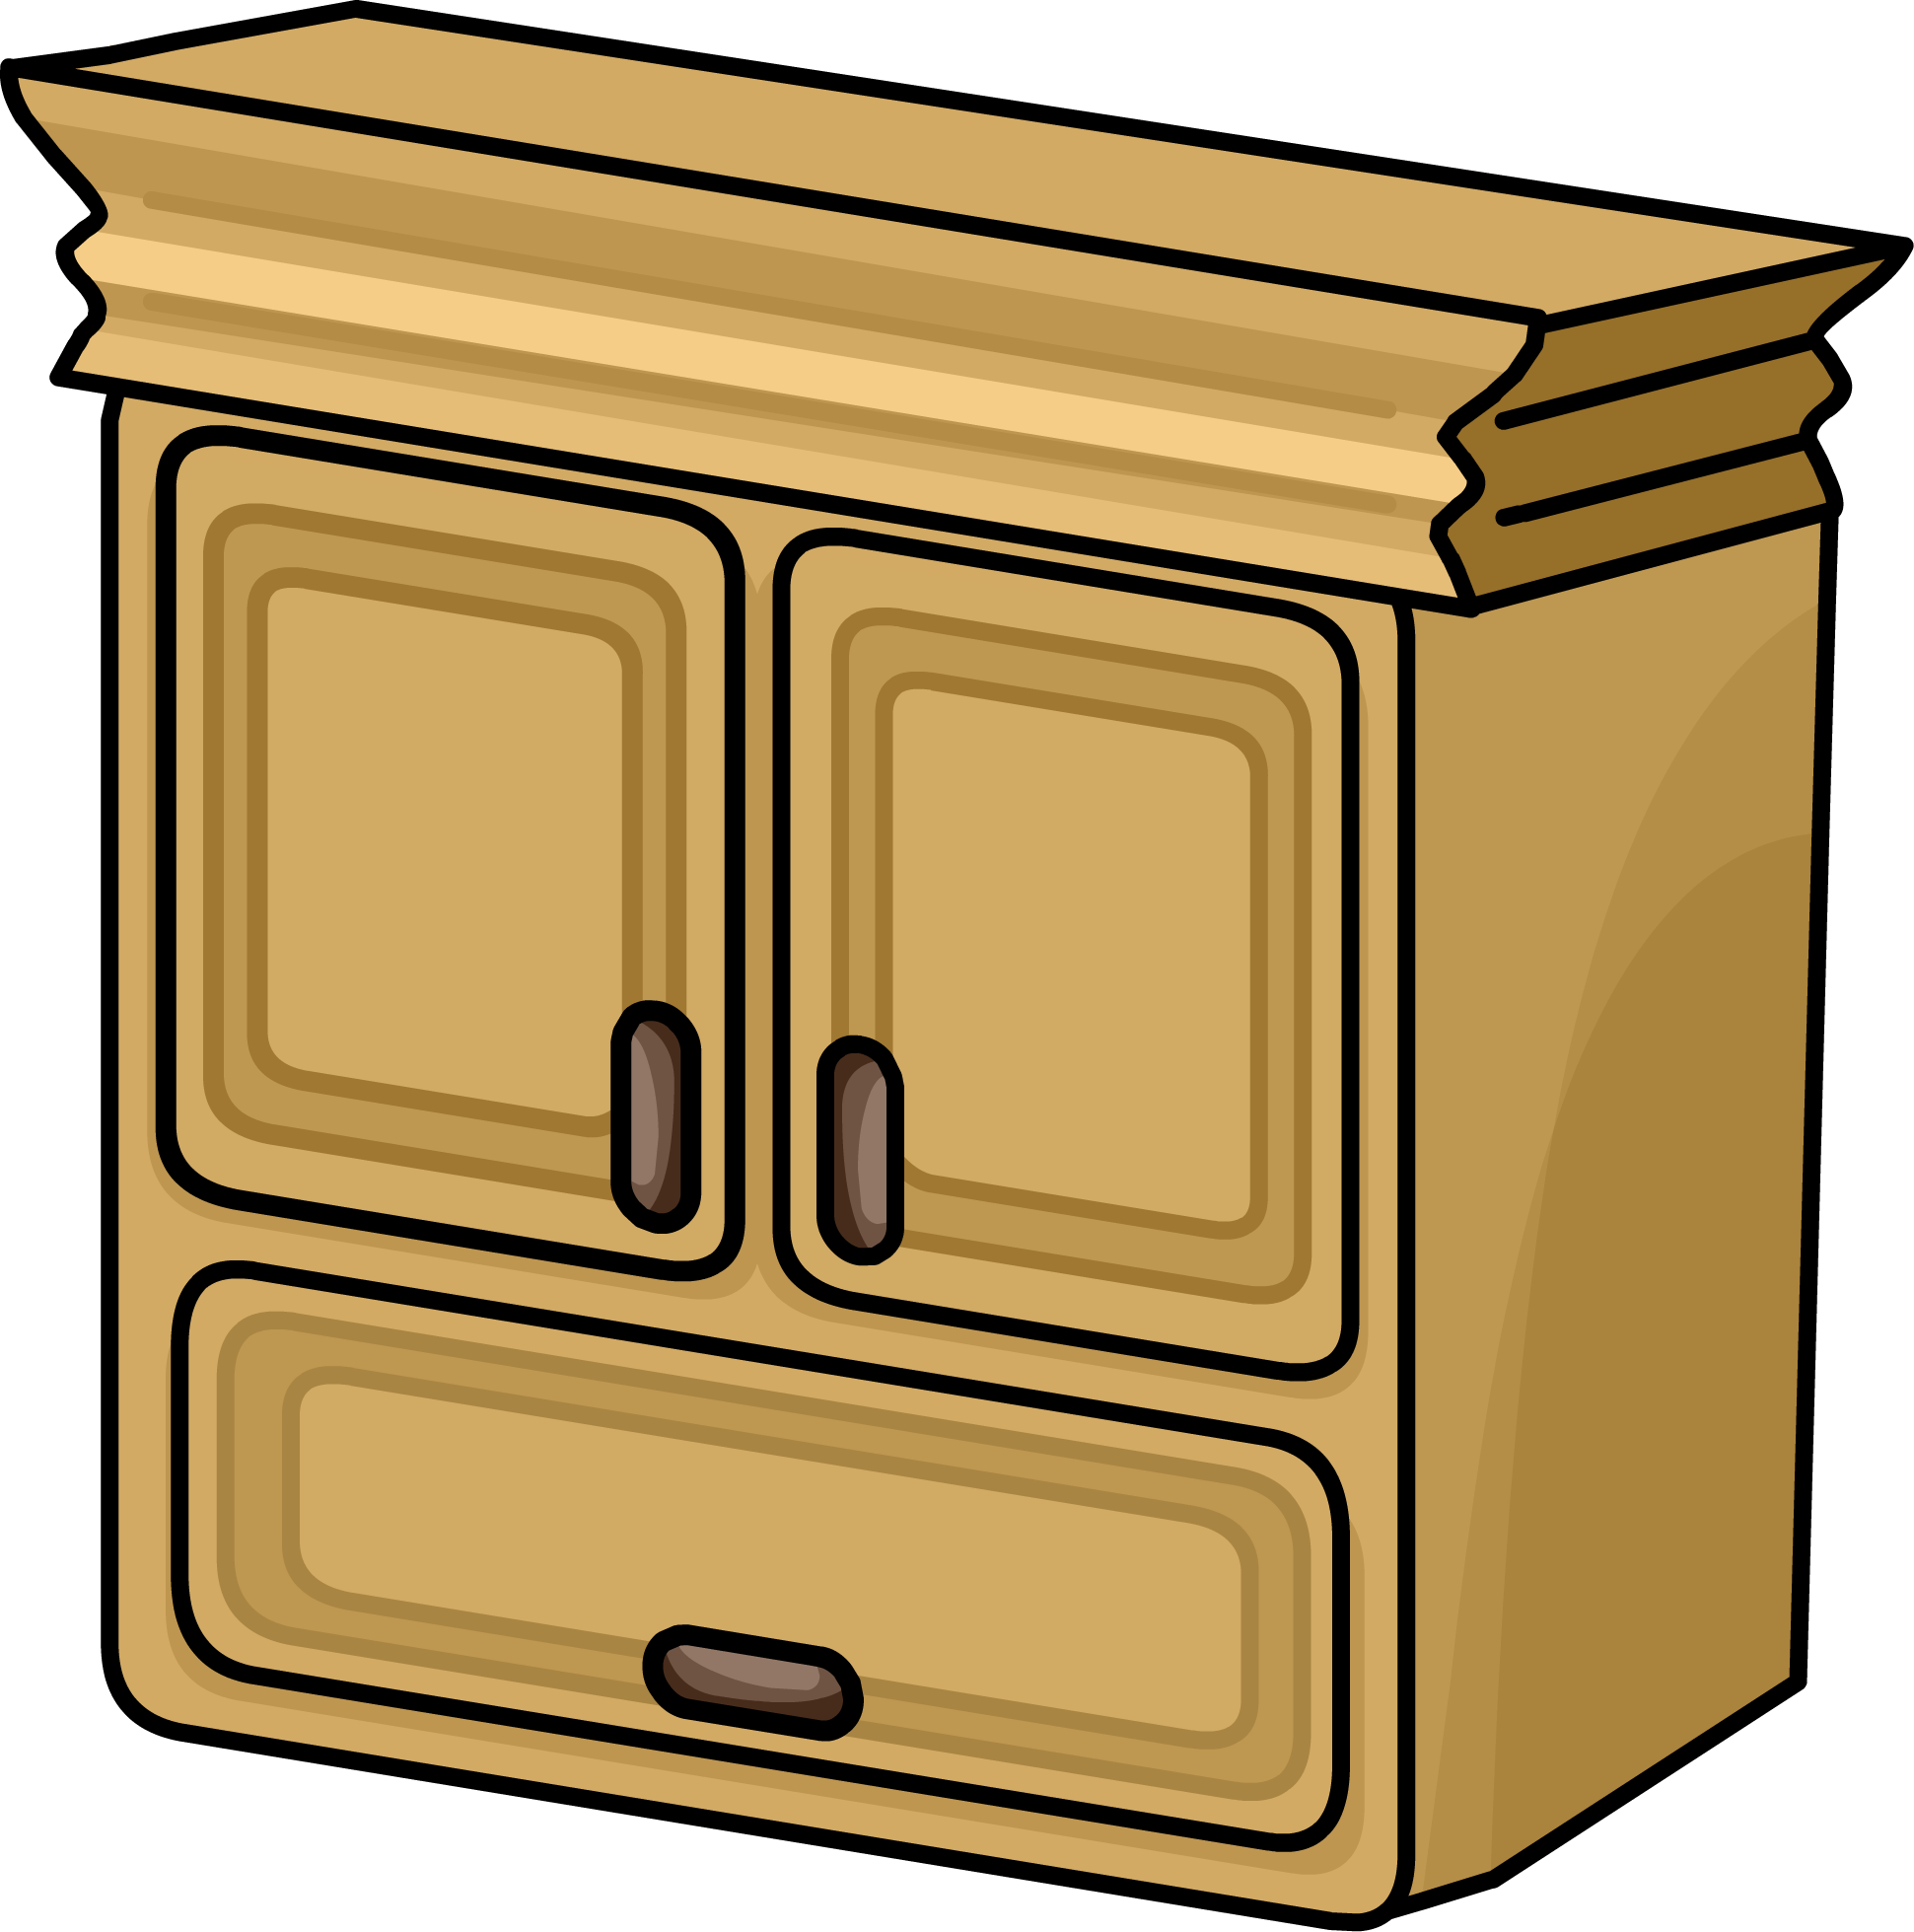 Image - Cabinet sprite 007.png | Club Penguin Wiki | FANDOM powered by ...